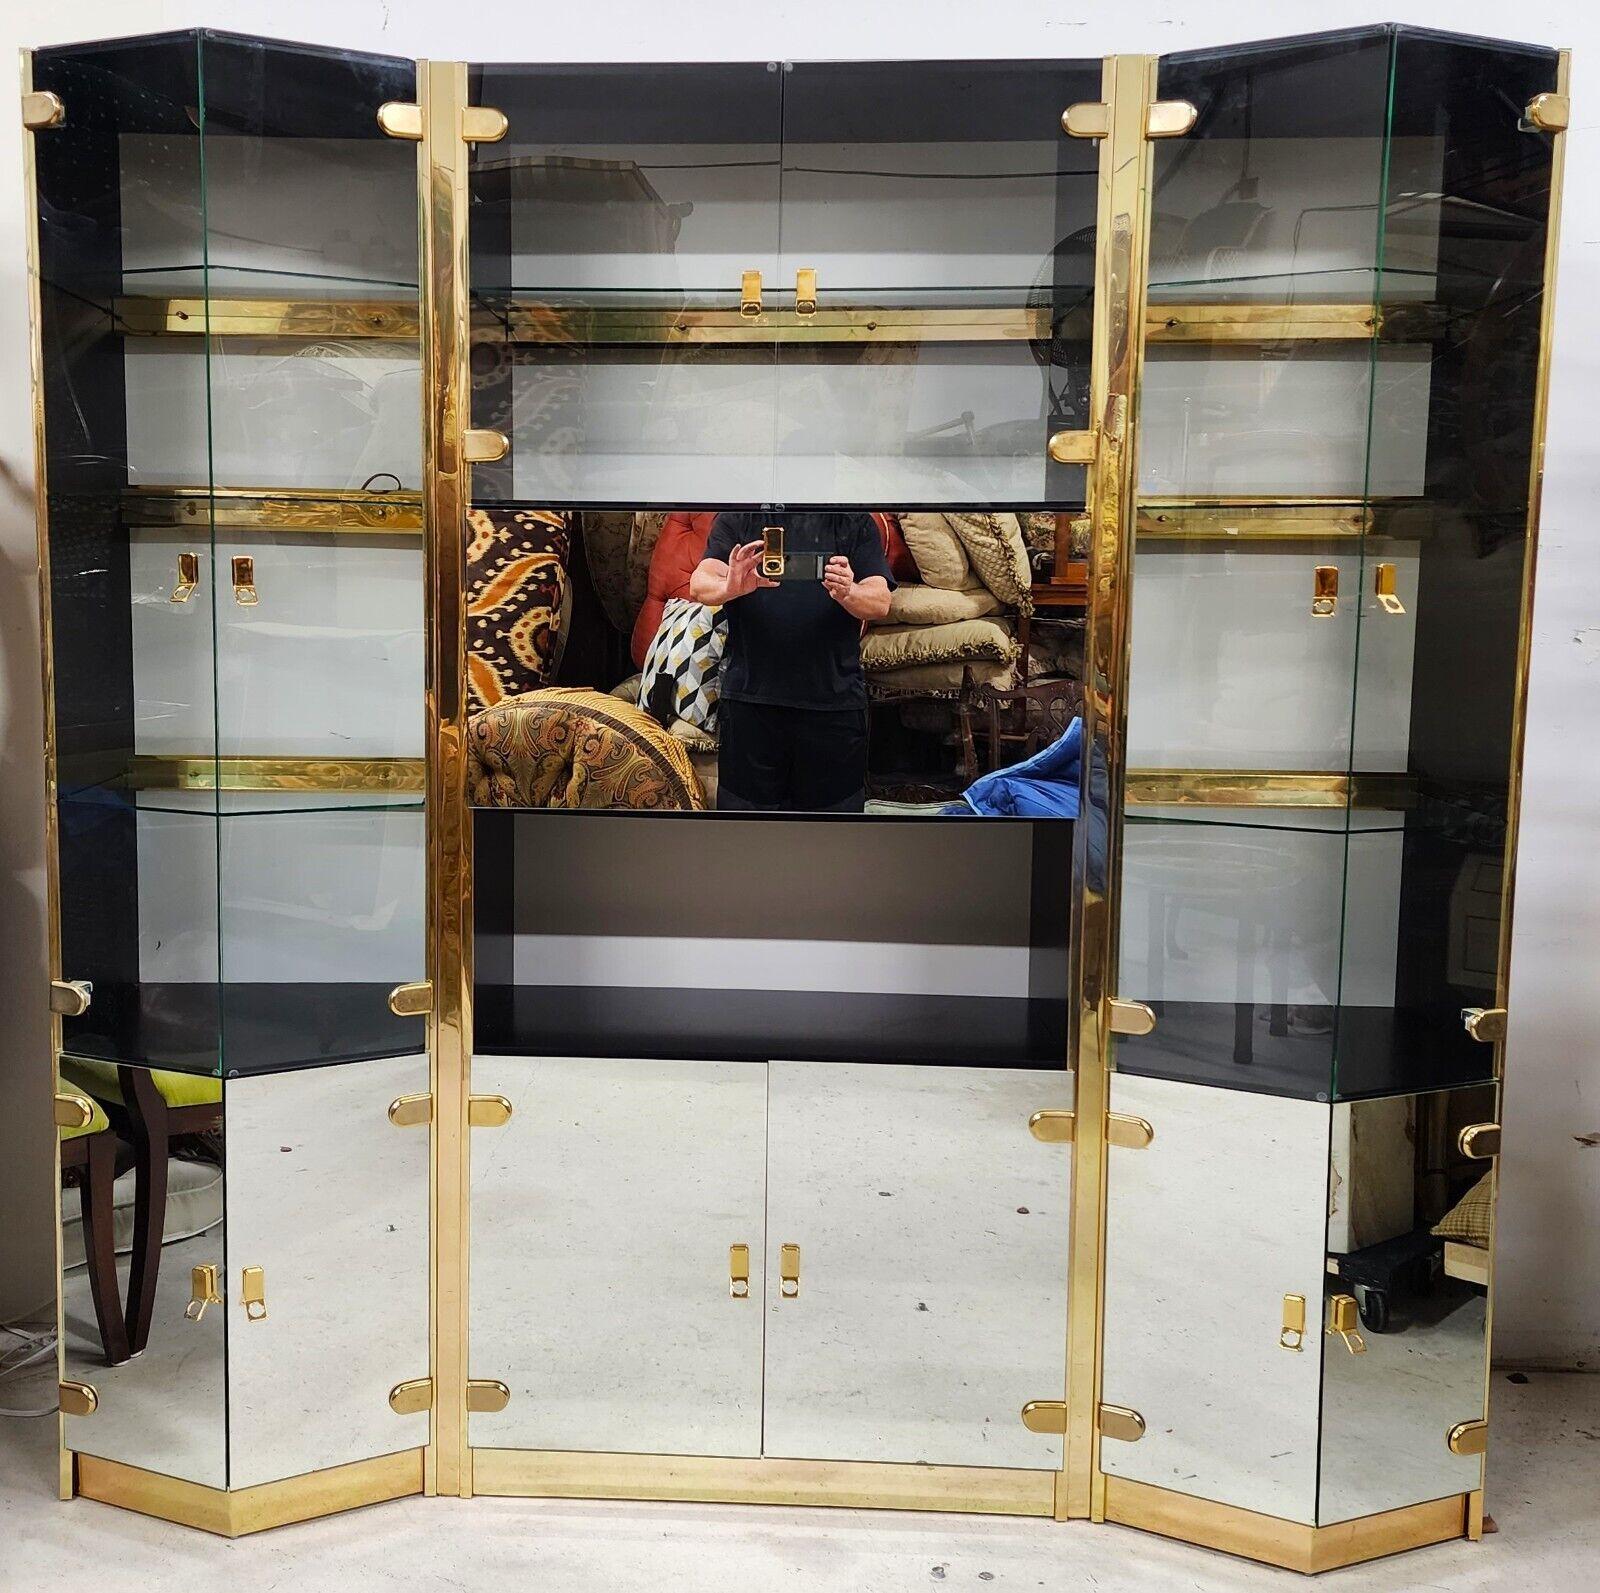 For FULL item description click on CONTINUE READING at the bottom of this page.

Vintage 1970s wall display cabinet with dry bar

This is one of the most perfectly designed and detailed cabinets we have ever listed. Each glass shelf is inserted